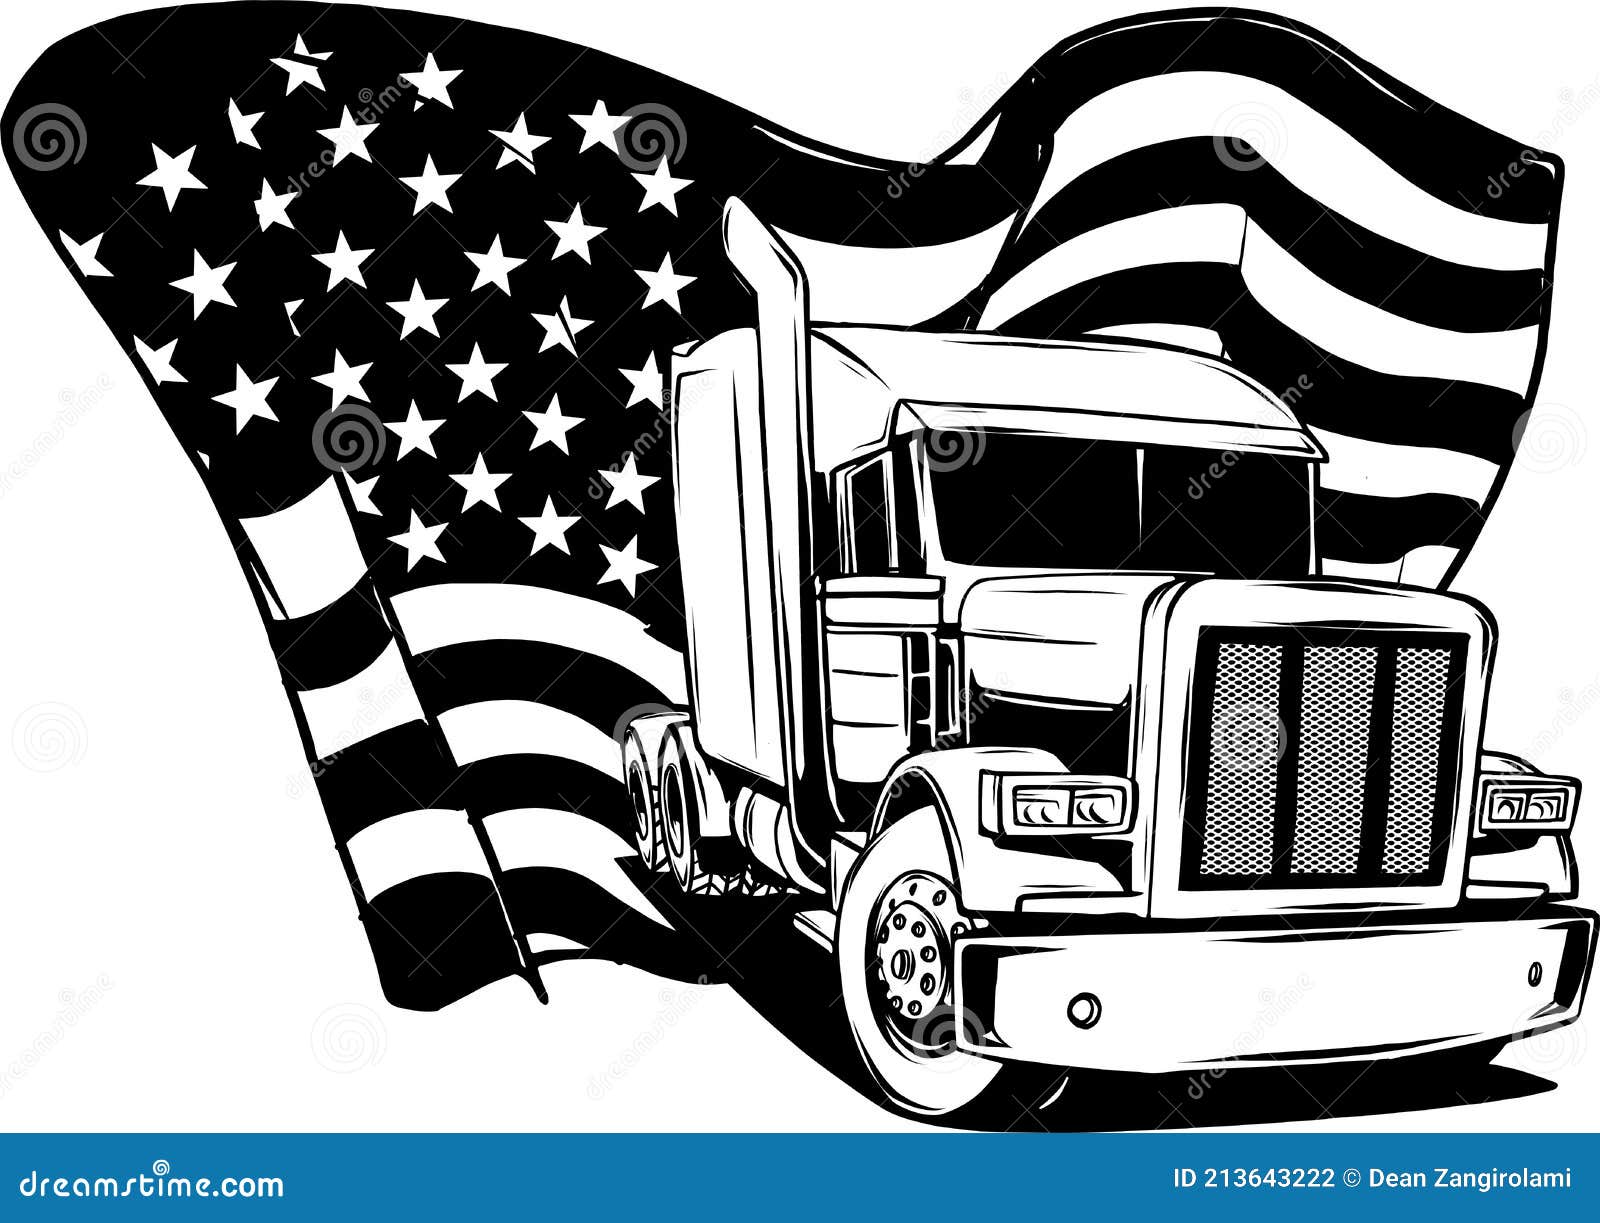 Draw in Black and White of Classic American Truck. Vector Illustration ...